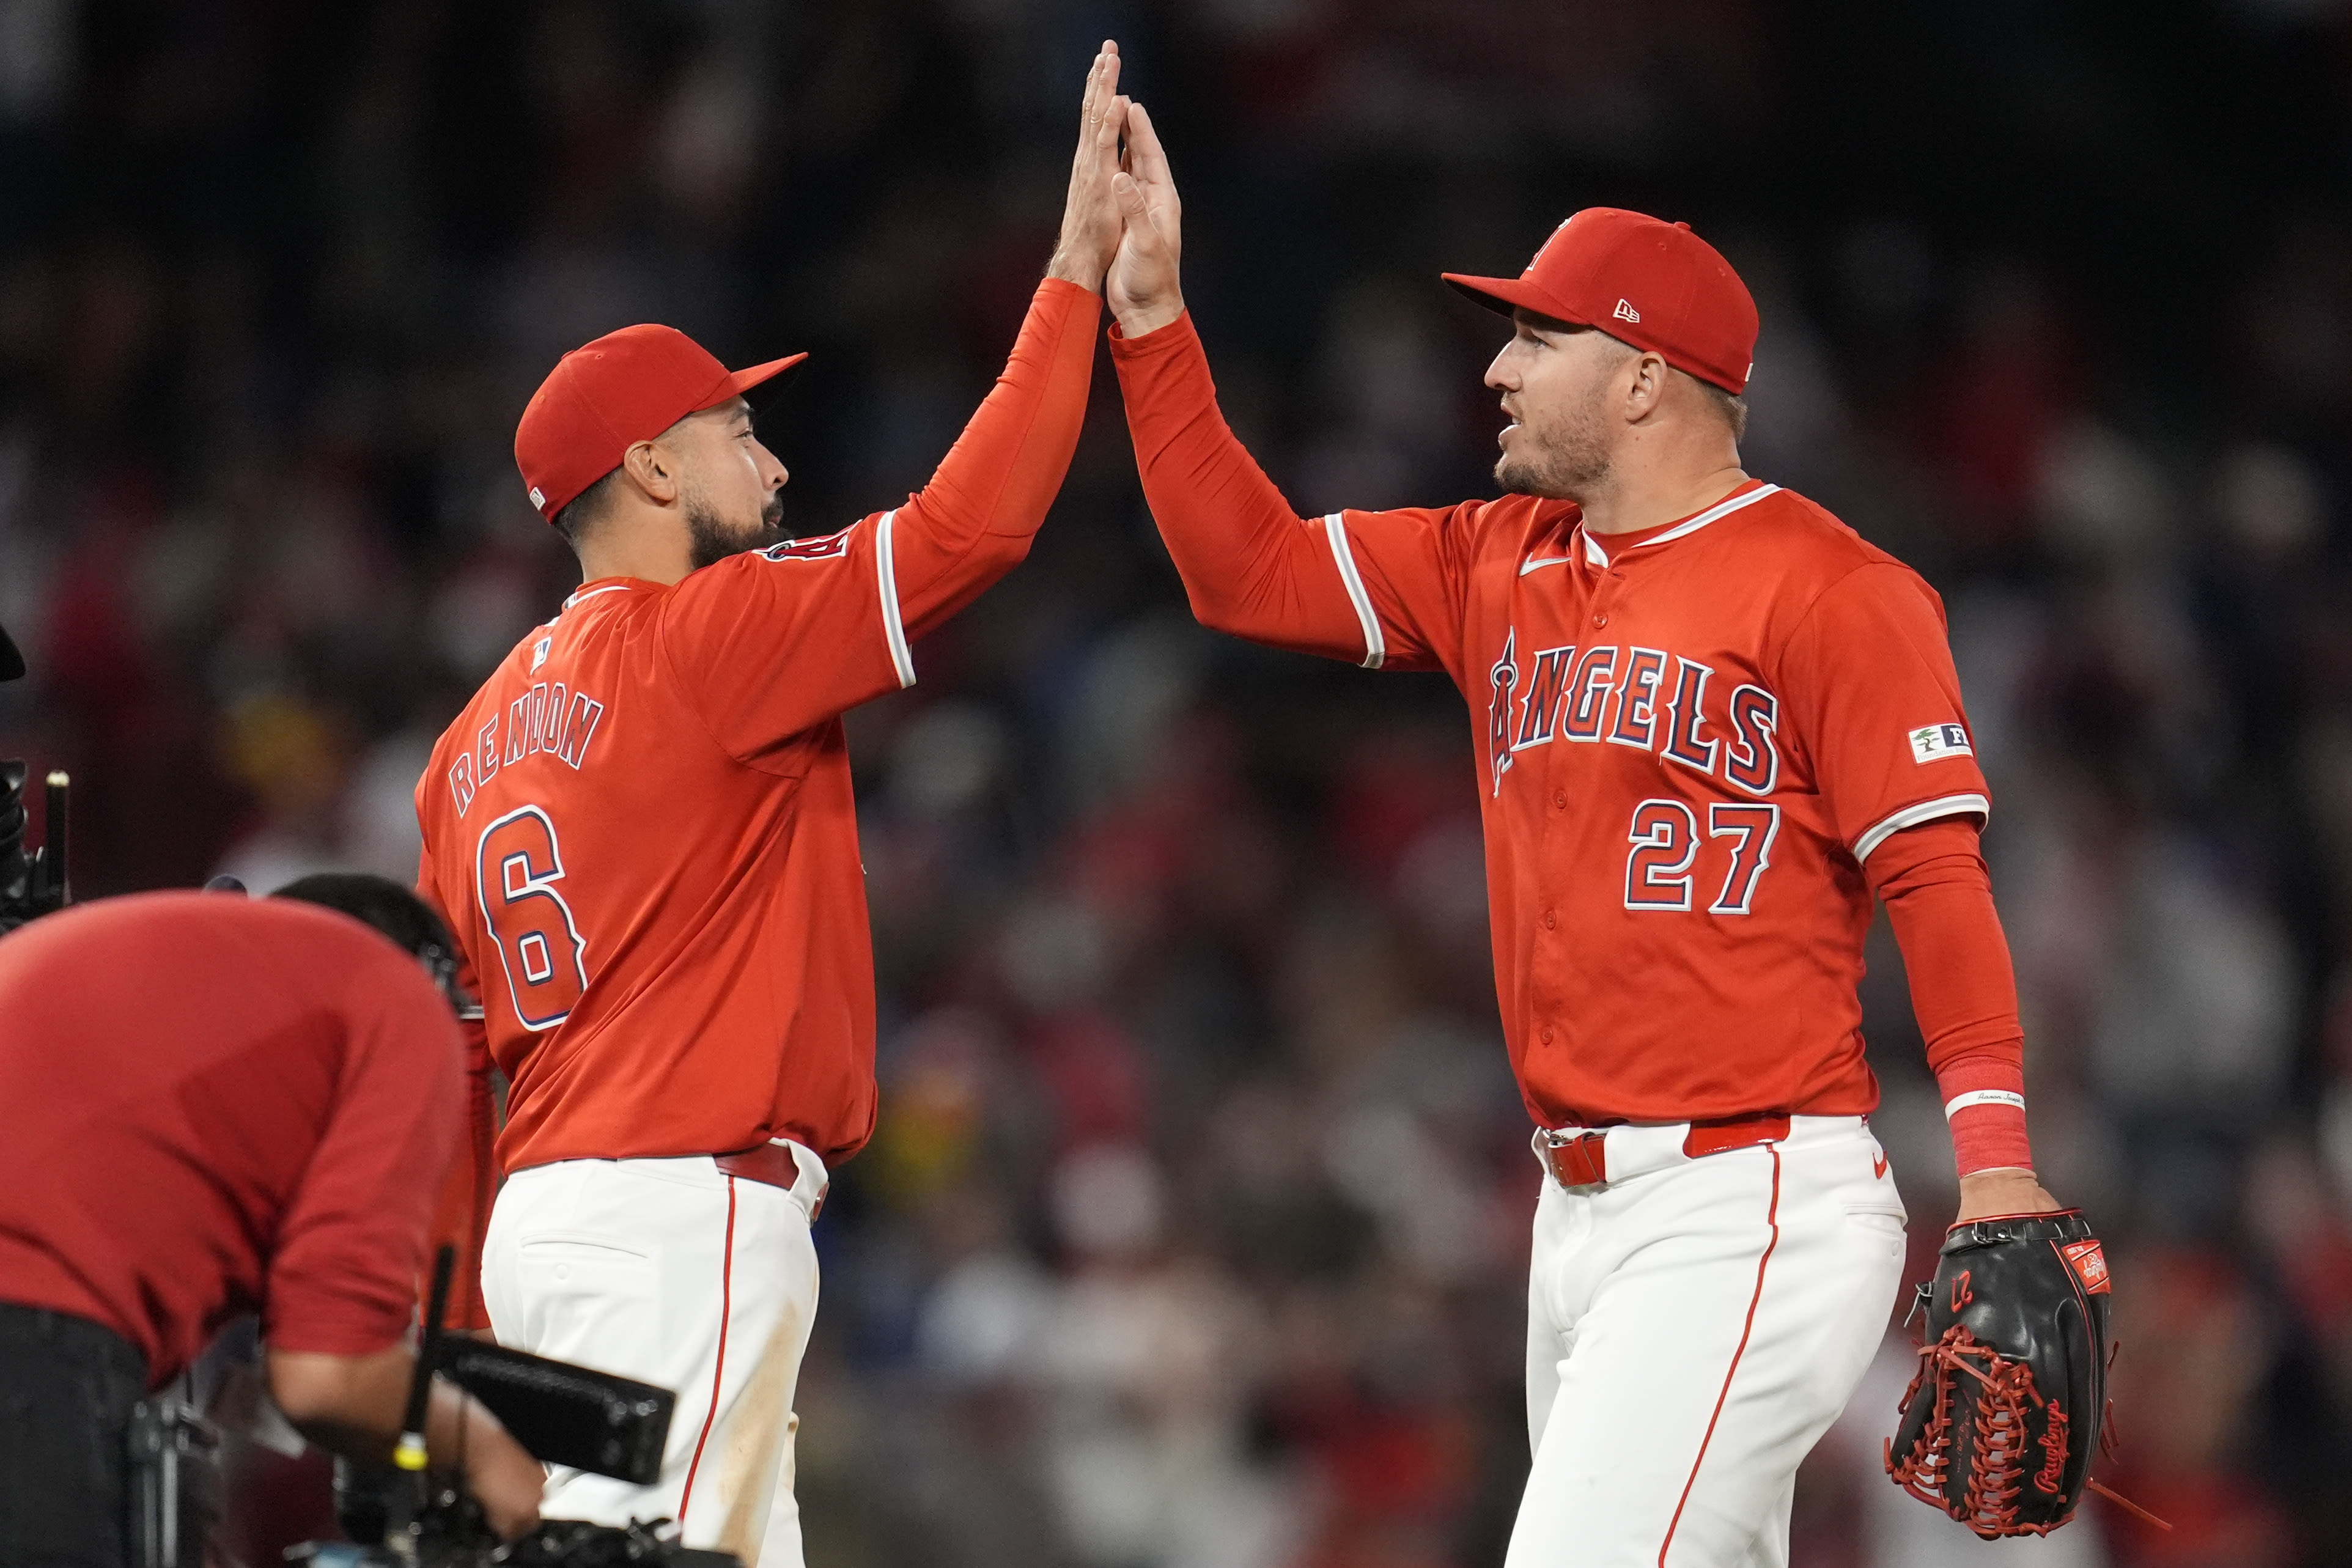 José Soriano delivers six shutout innings for Angels in win over Guardians